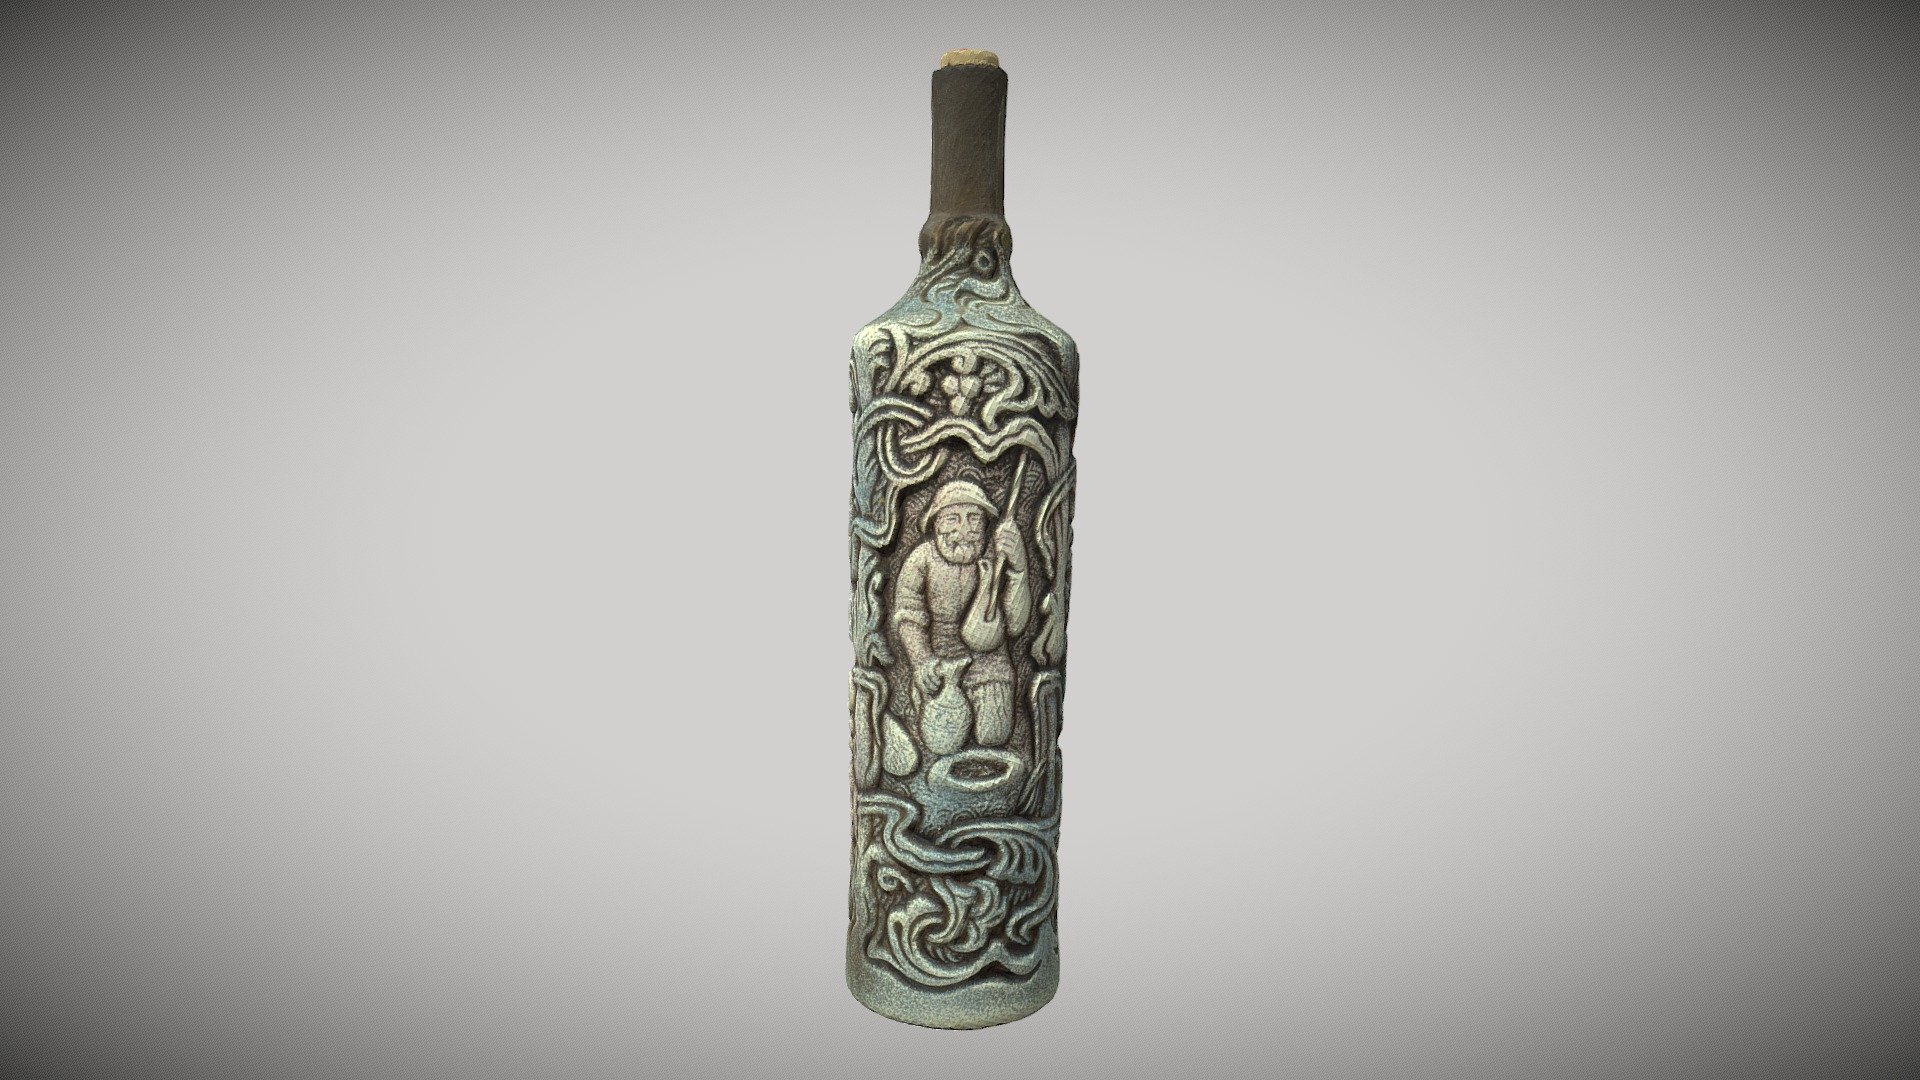 Photorealistik photogrammetry model of vine bottle with textures. This bottle  3D scanned using photogrammetry and retopologized to use in bigger scenes or games.Ready to use, just put it into your scene - Vine bottle - Download Free 3D model by ruda5 3d model